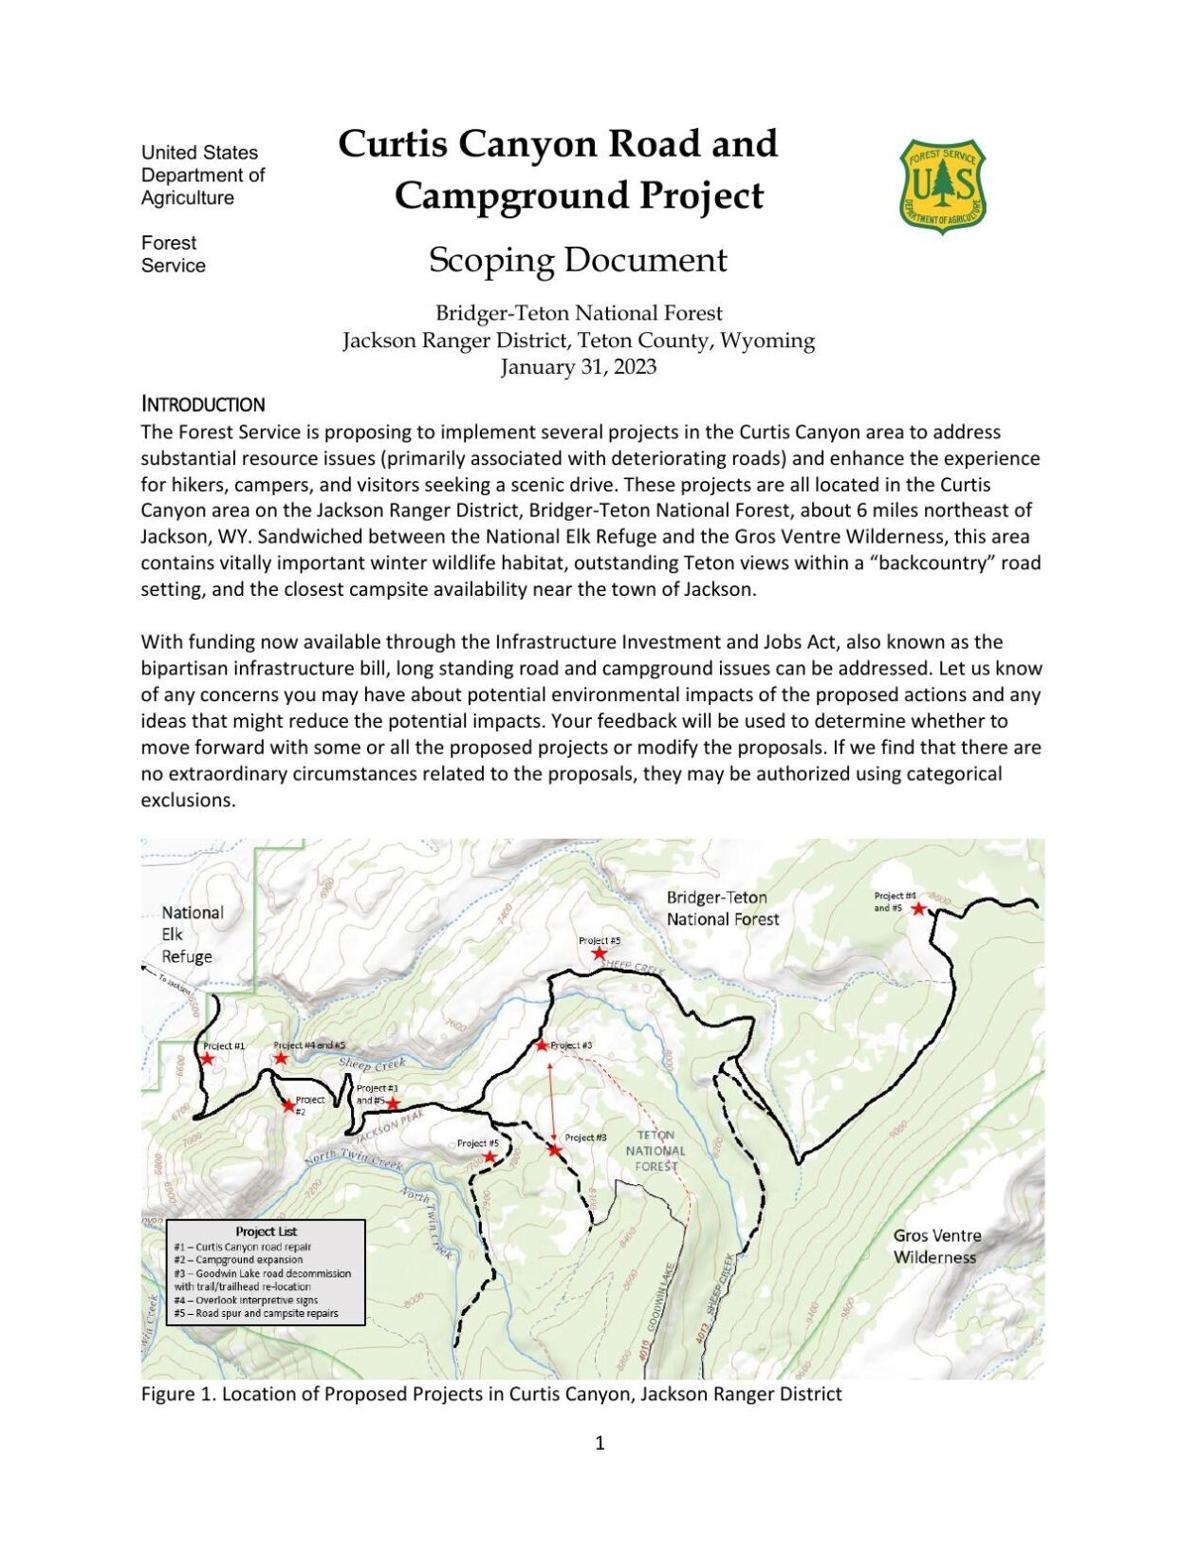 Curtis Canyon scoping notice